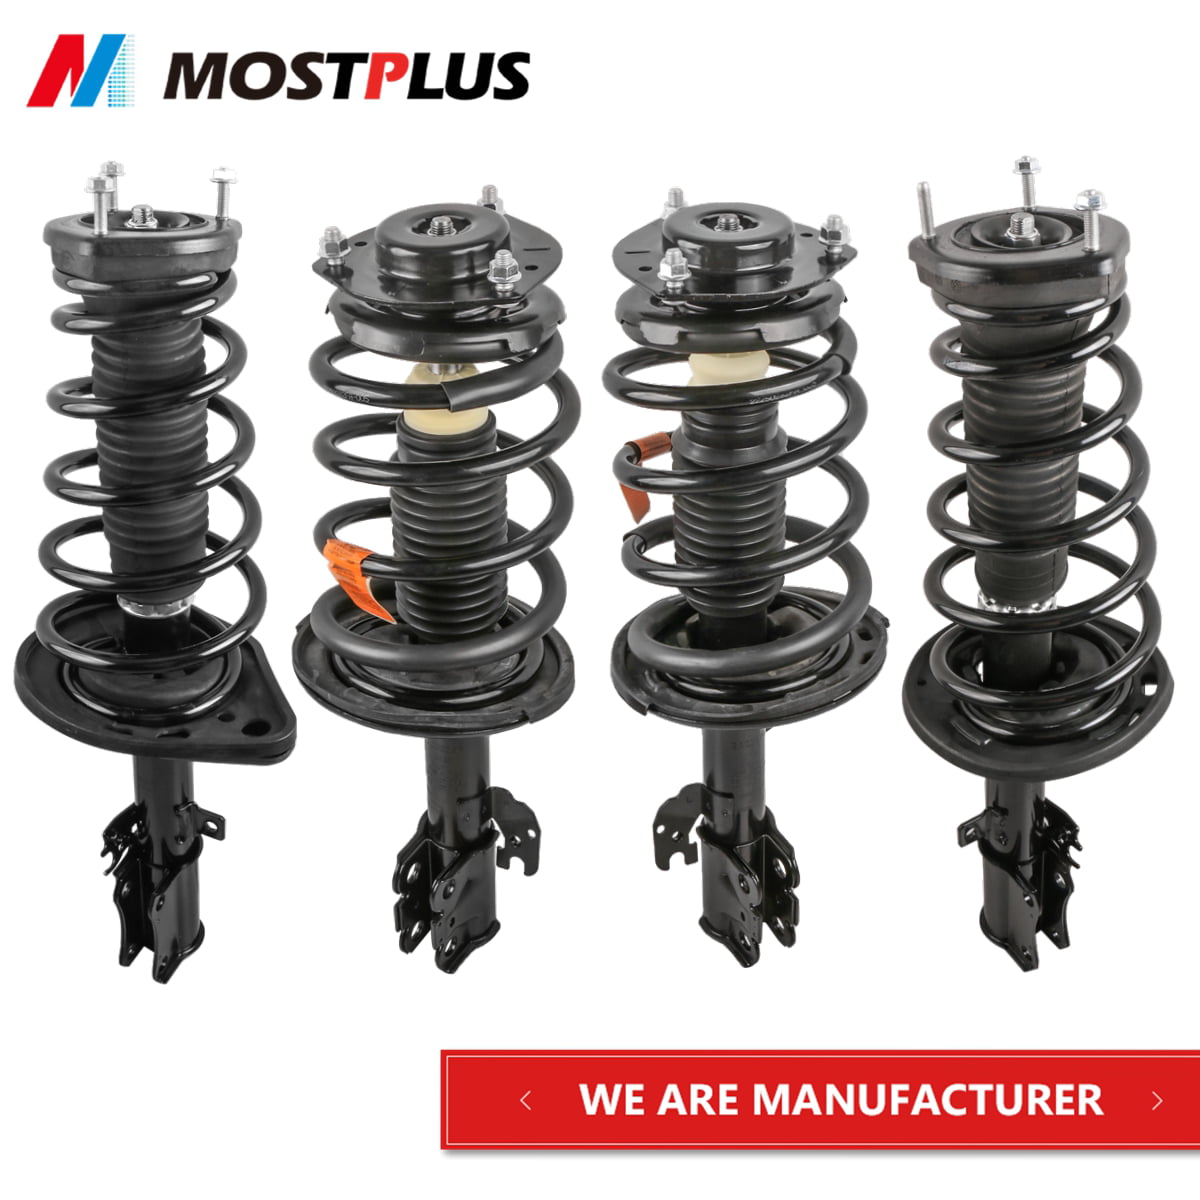 MOSTPLUS Rear Complete Strut Spring Shock Absorber 172309 172310 Compatible with 2008-2011 Toyota Camry Avalon